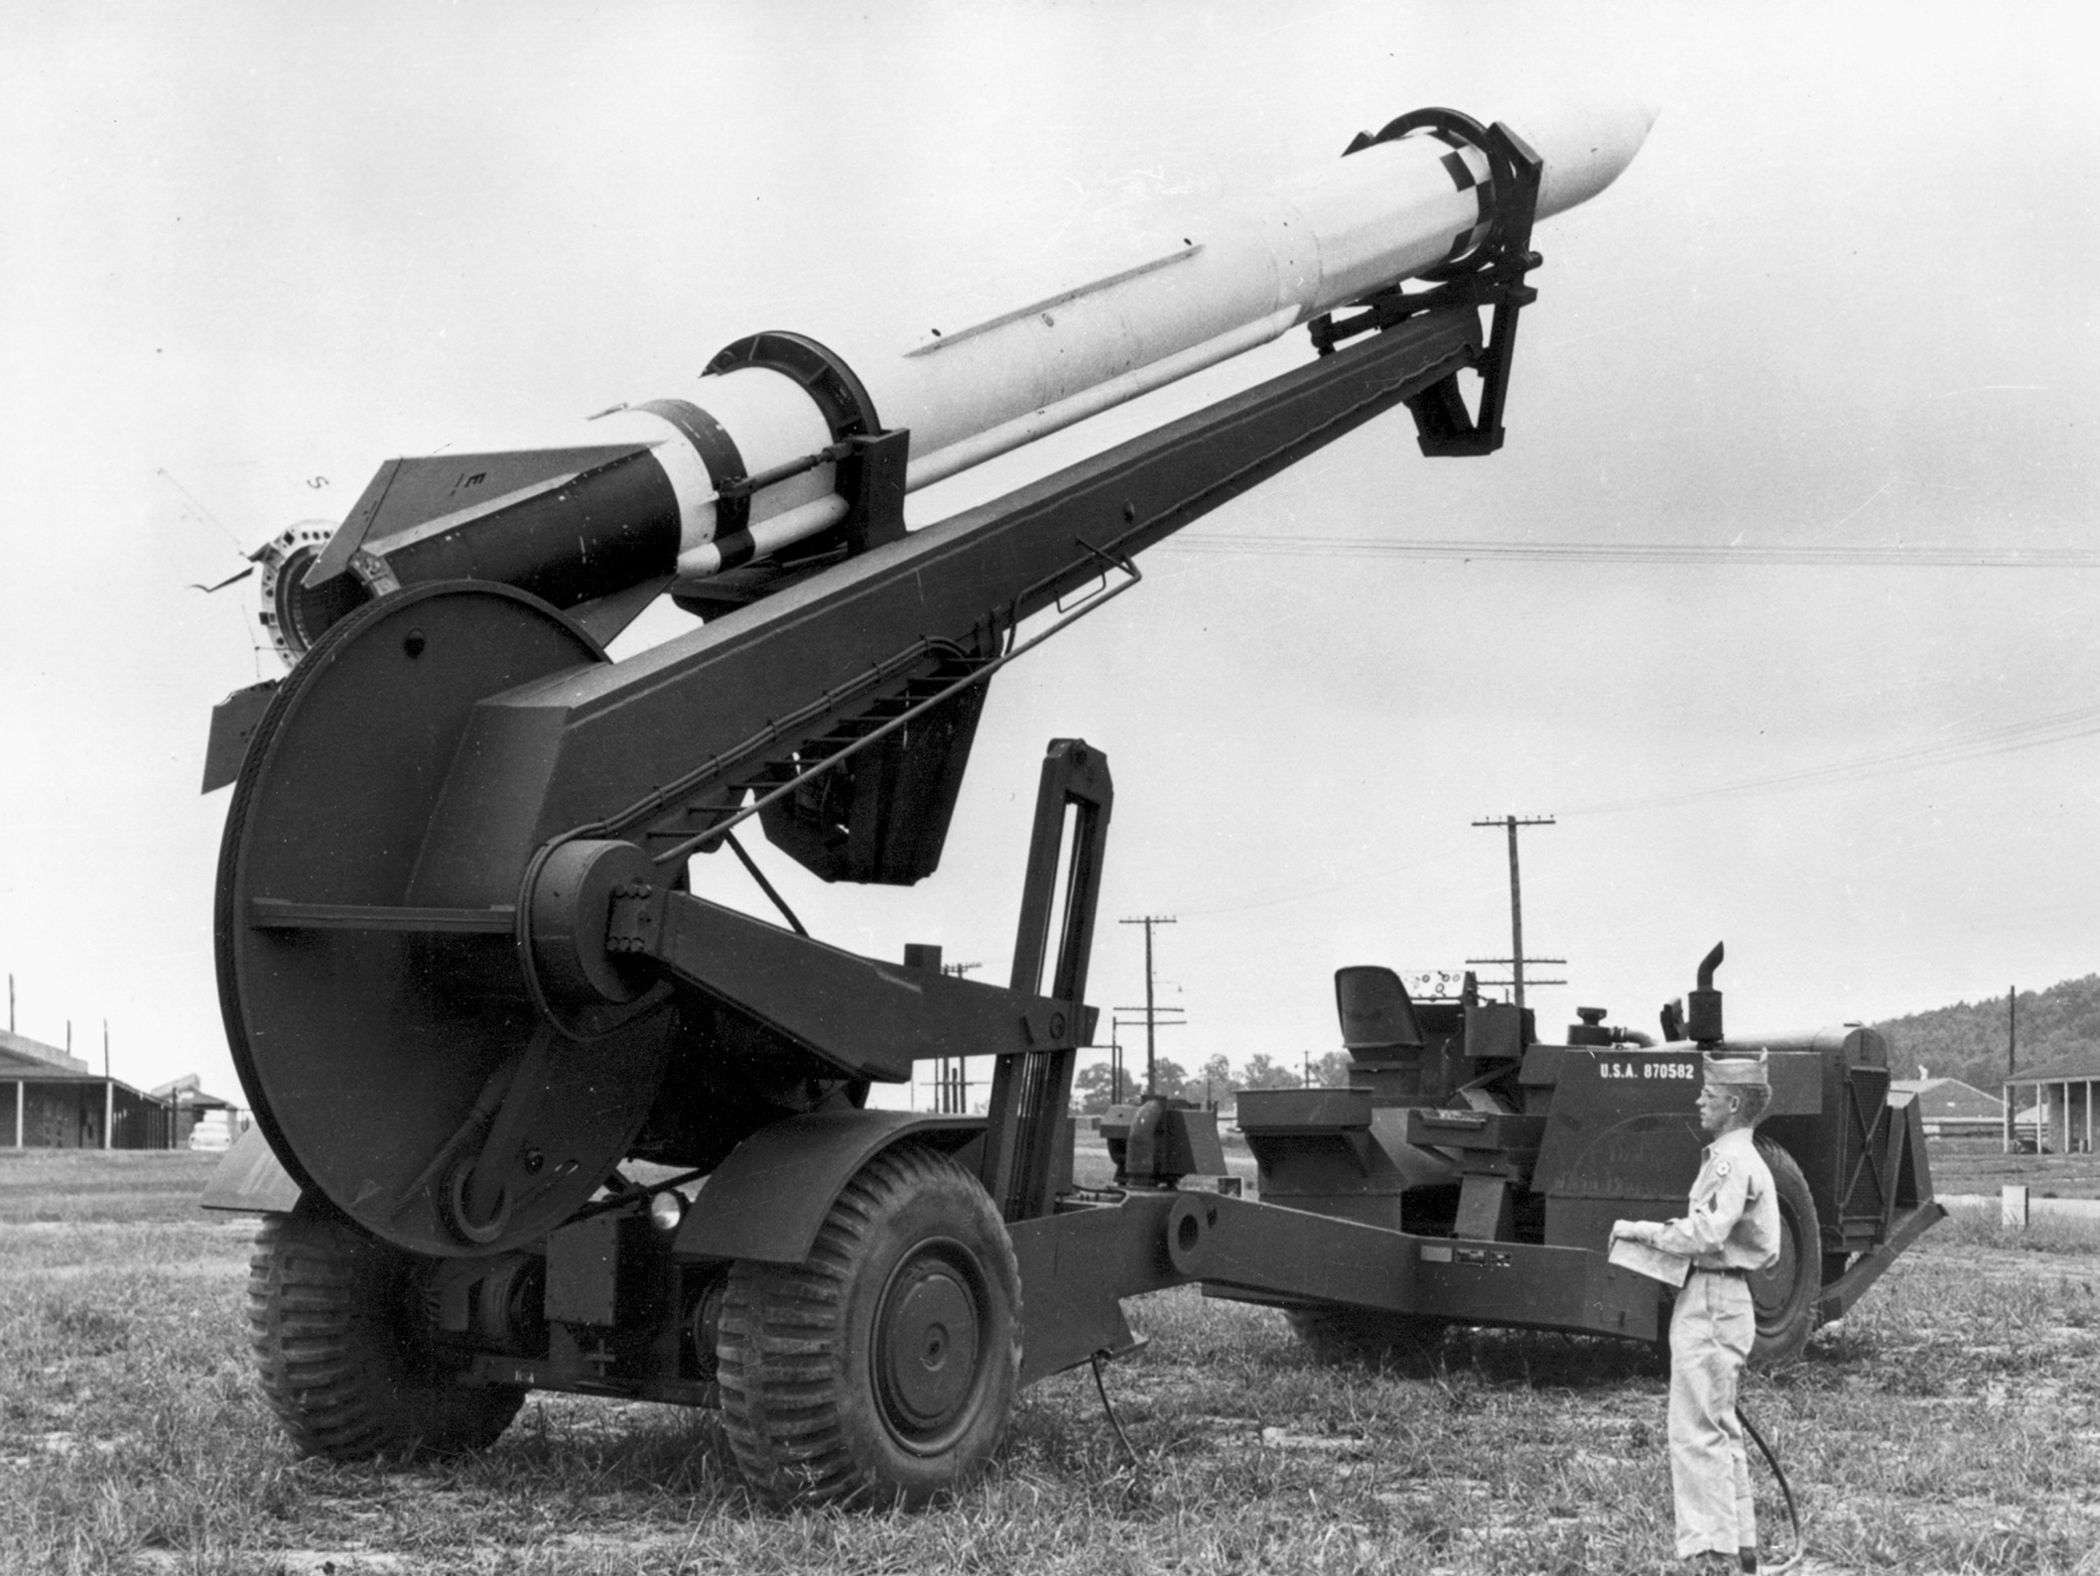 Corporal Type II erector launcher placing missile in upright position.